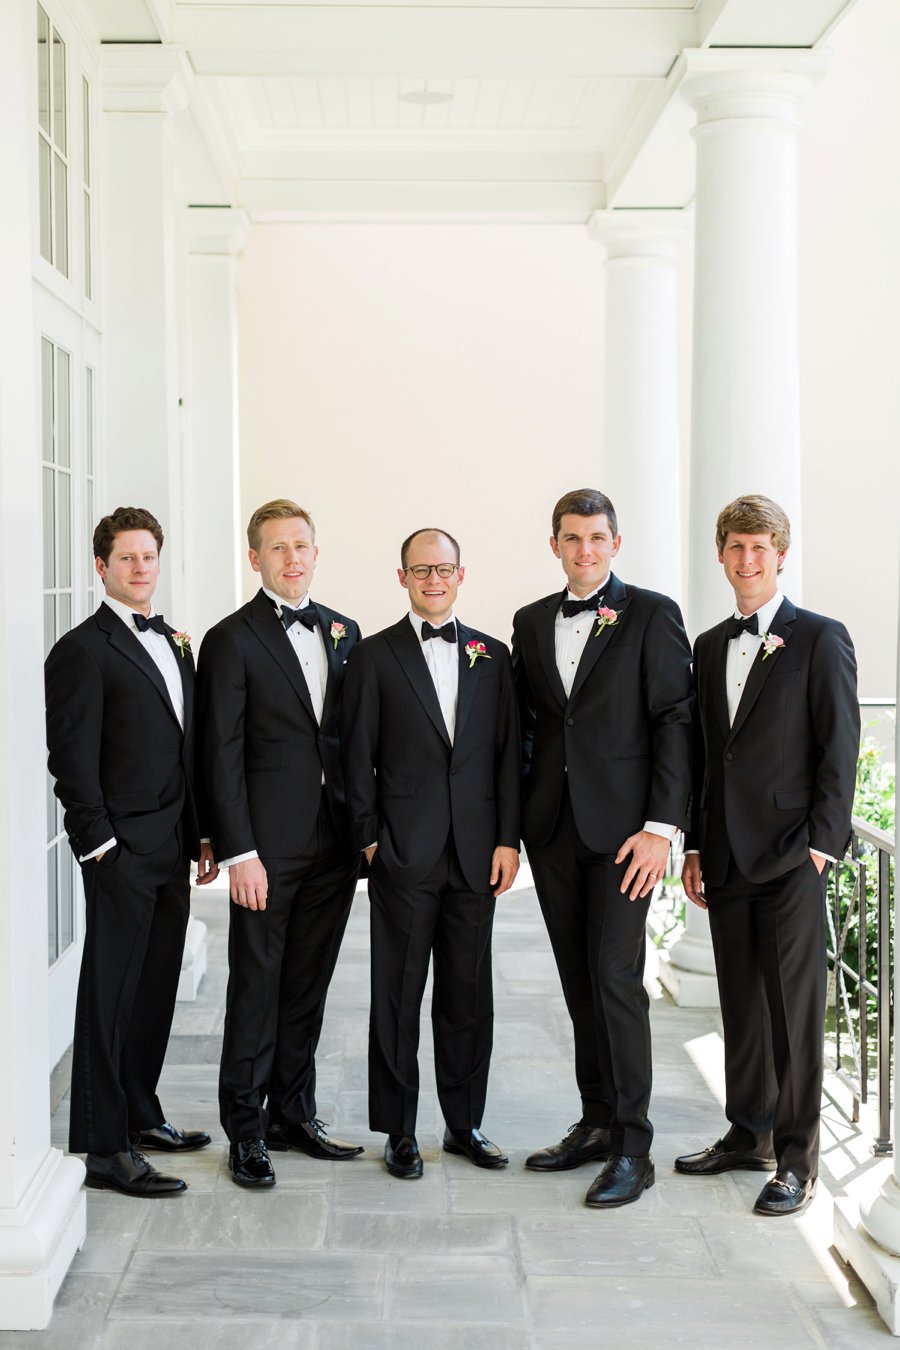 An Elegant Floral Inspired Southern Wedding via TheELD.com